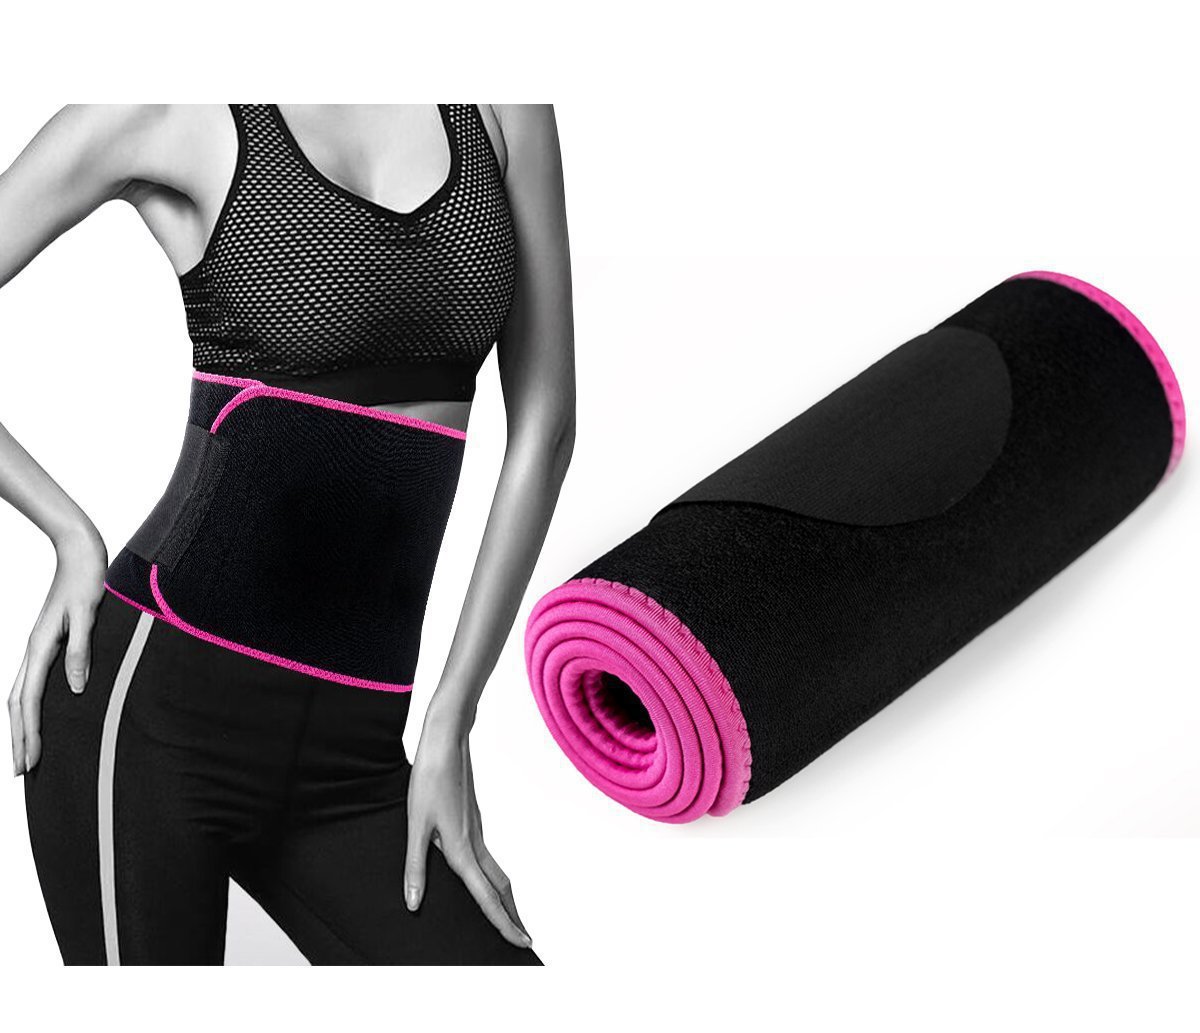 Suddenly and violently sweat belly in belt movement plastic belt hand-picked waist non-trace toning belt belly in adjustable color fitness belts